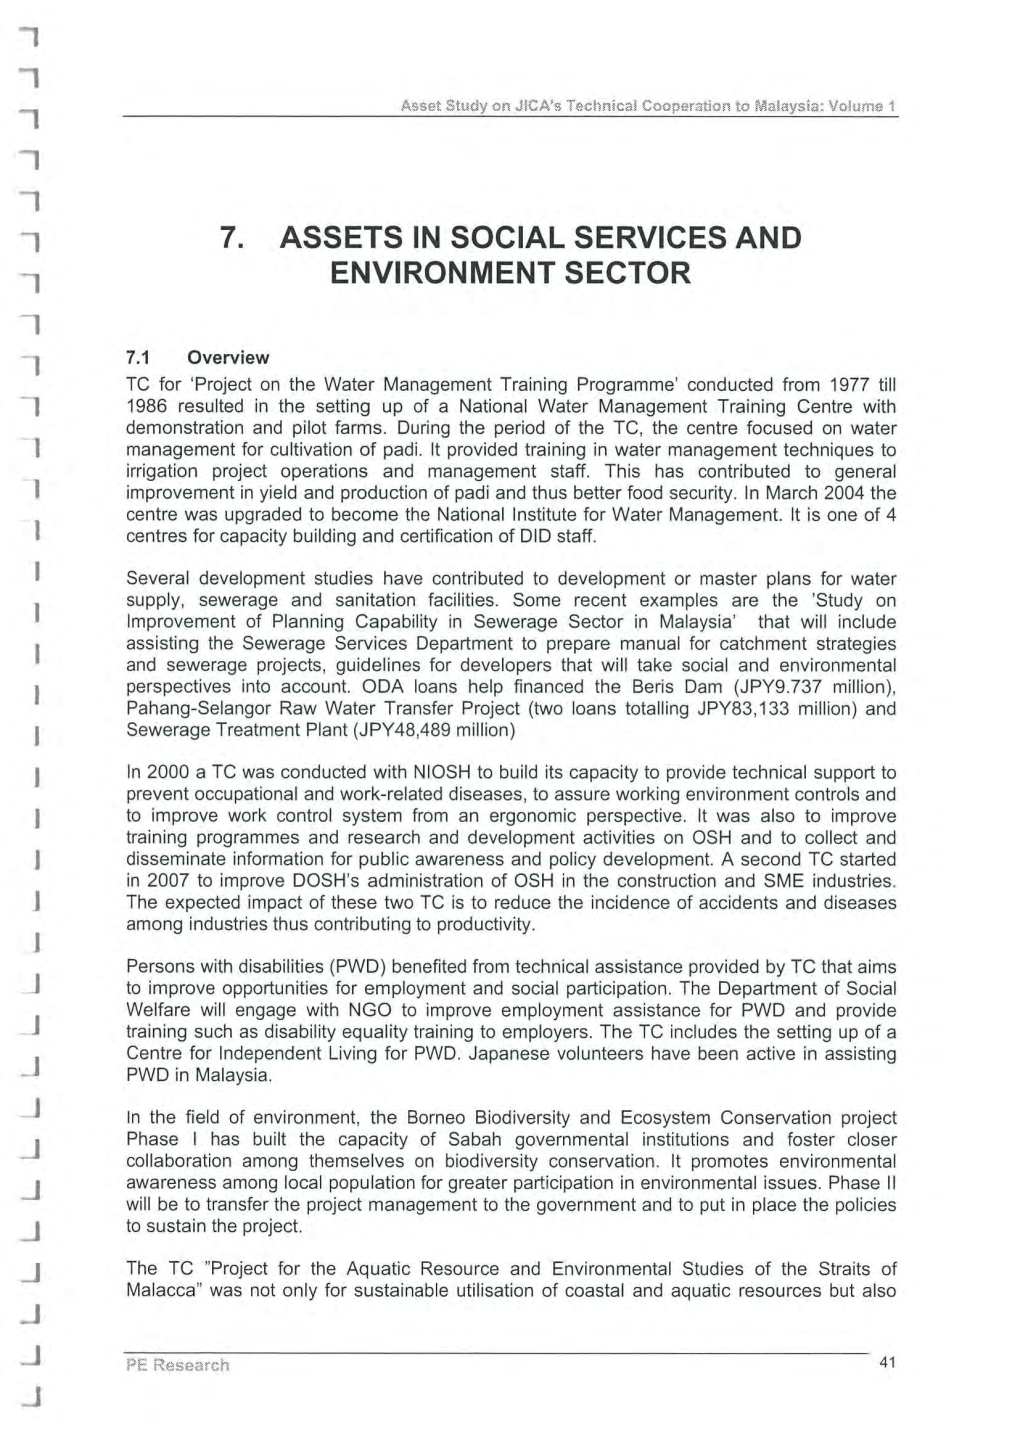 1 ...J 7. Assets in Social Services and Environment